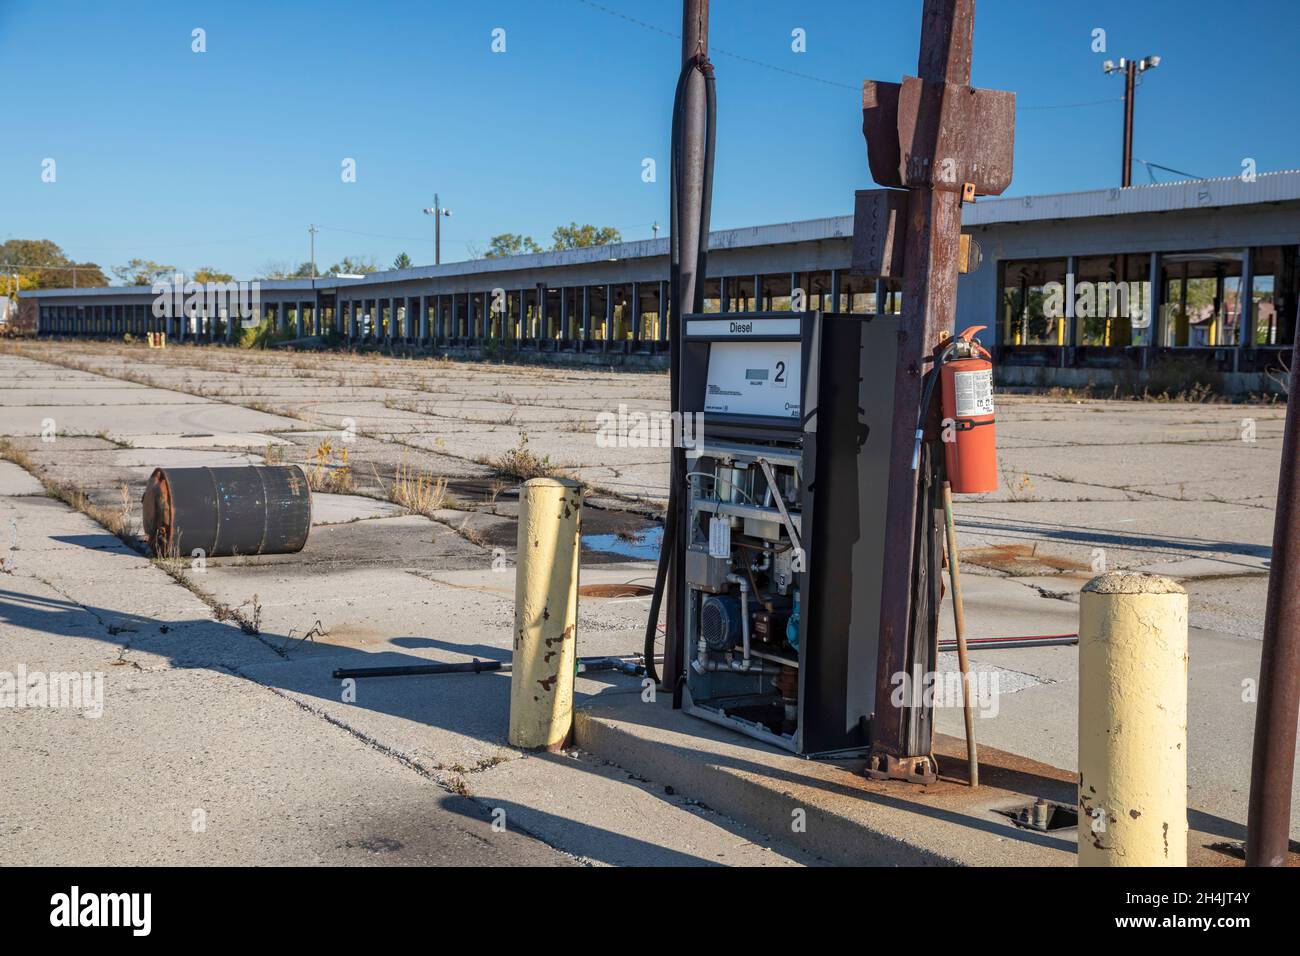 Detroit, Michigan - A diesel pump and loading docks at an abandoned trucking terminal, previously operated by Universal Truckload Services. Stock Photo